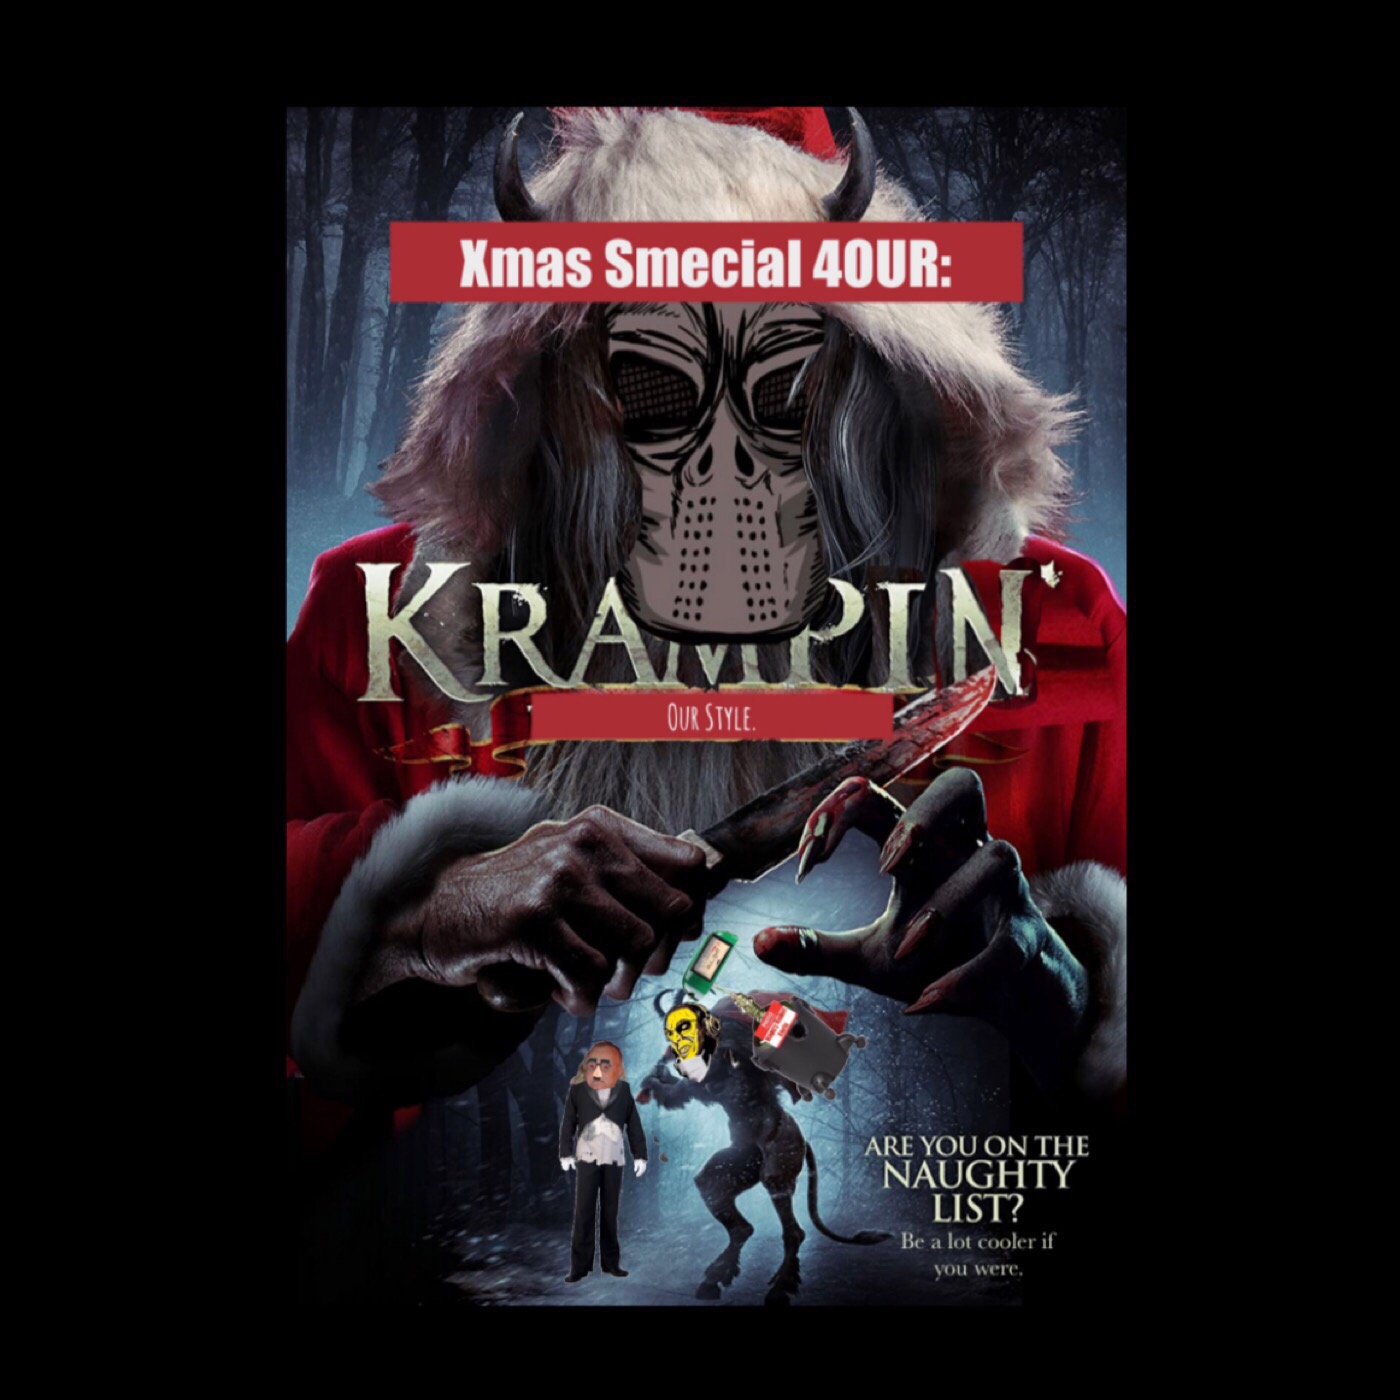 Xmas Smecial 4OUR: Krampin’ our style